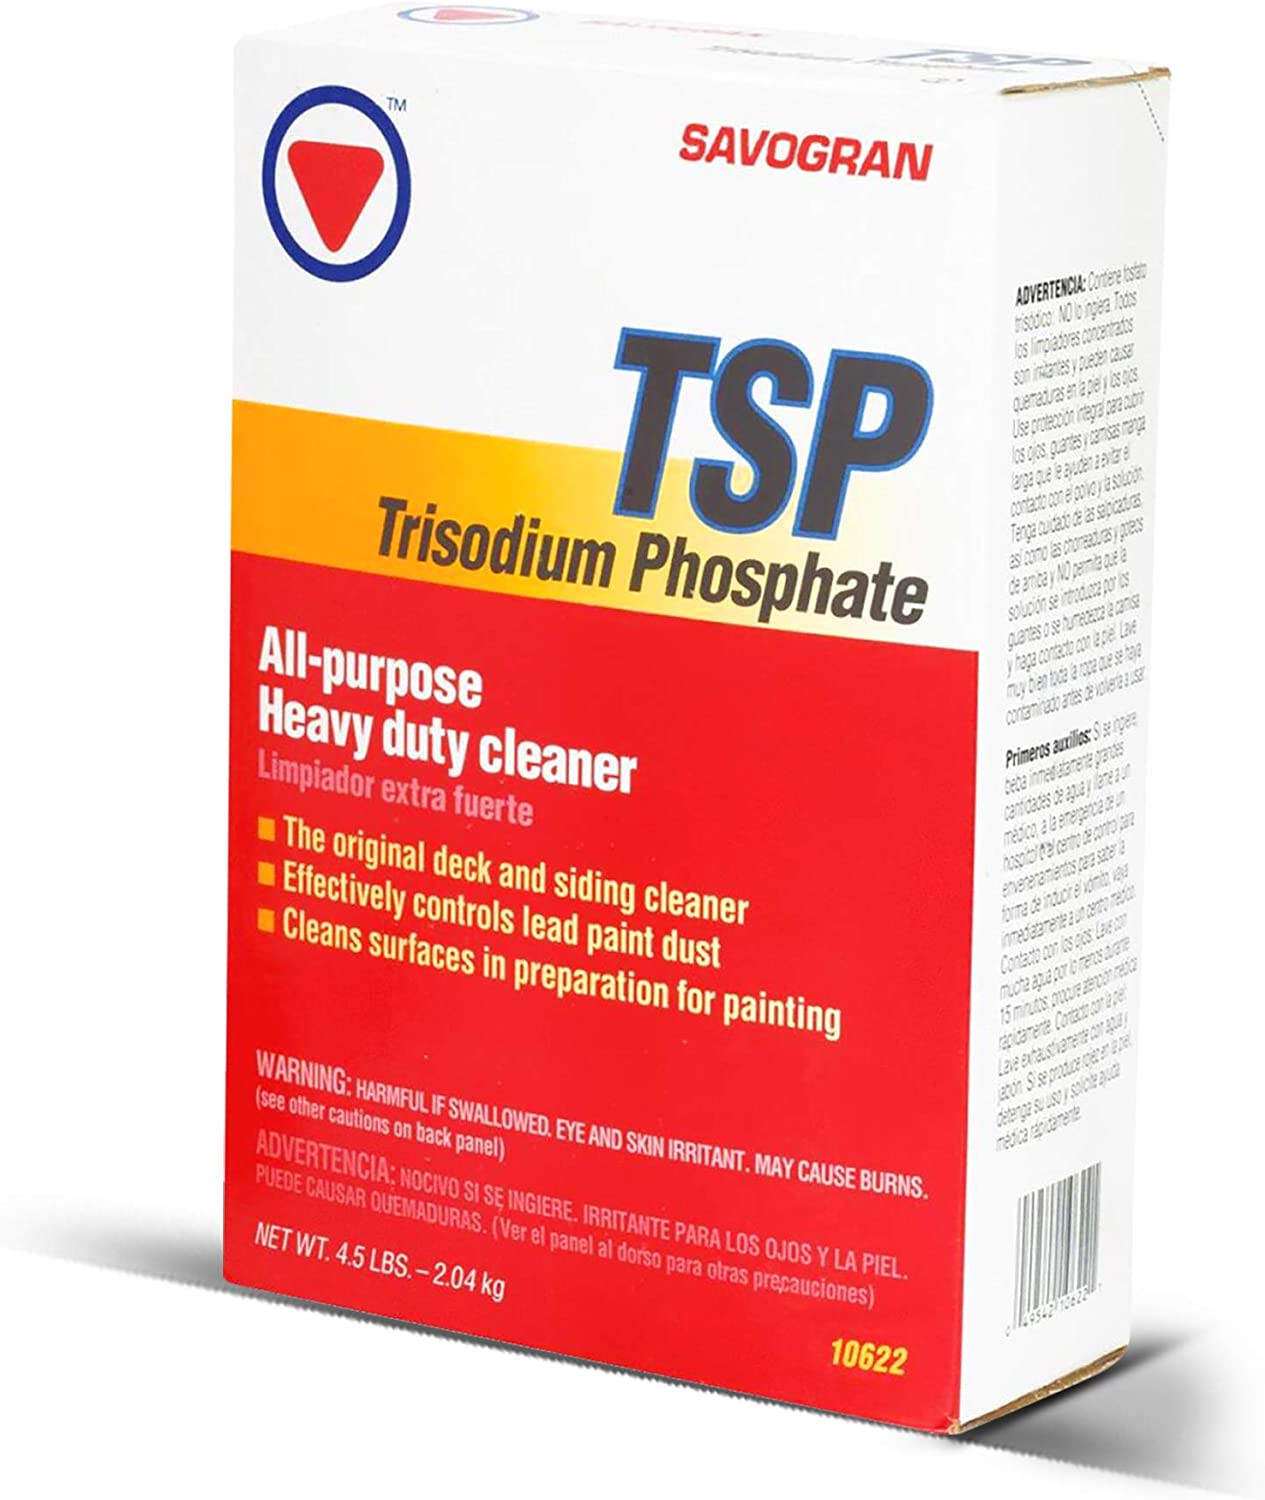 Savogran TSP Trisodium Phosphate Heavy Duty Cleaner 4.5 Pounds 10622 4-1/2 LB